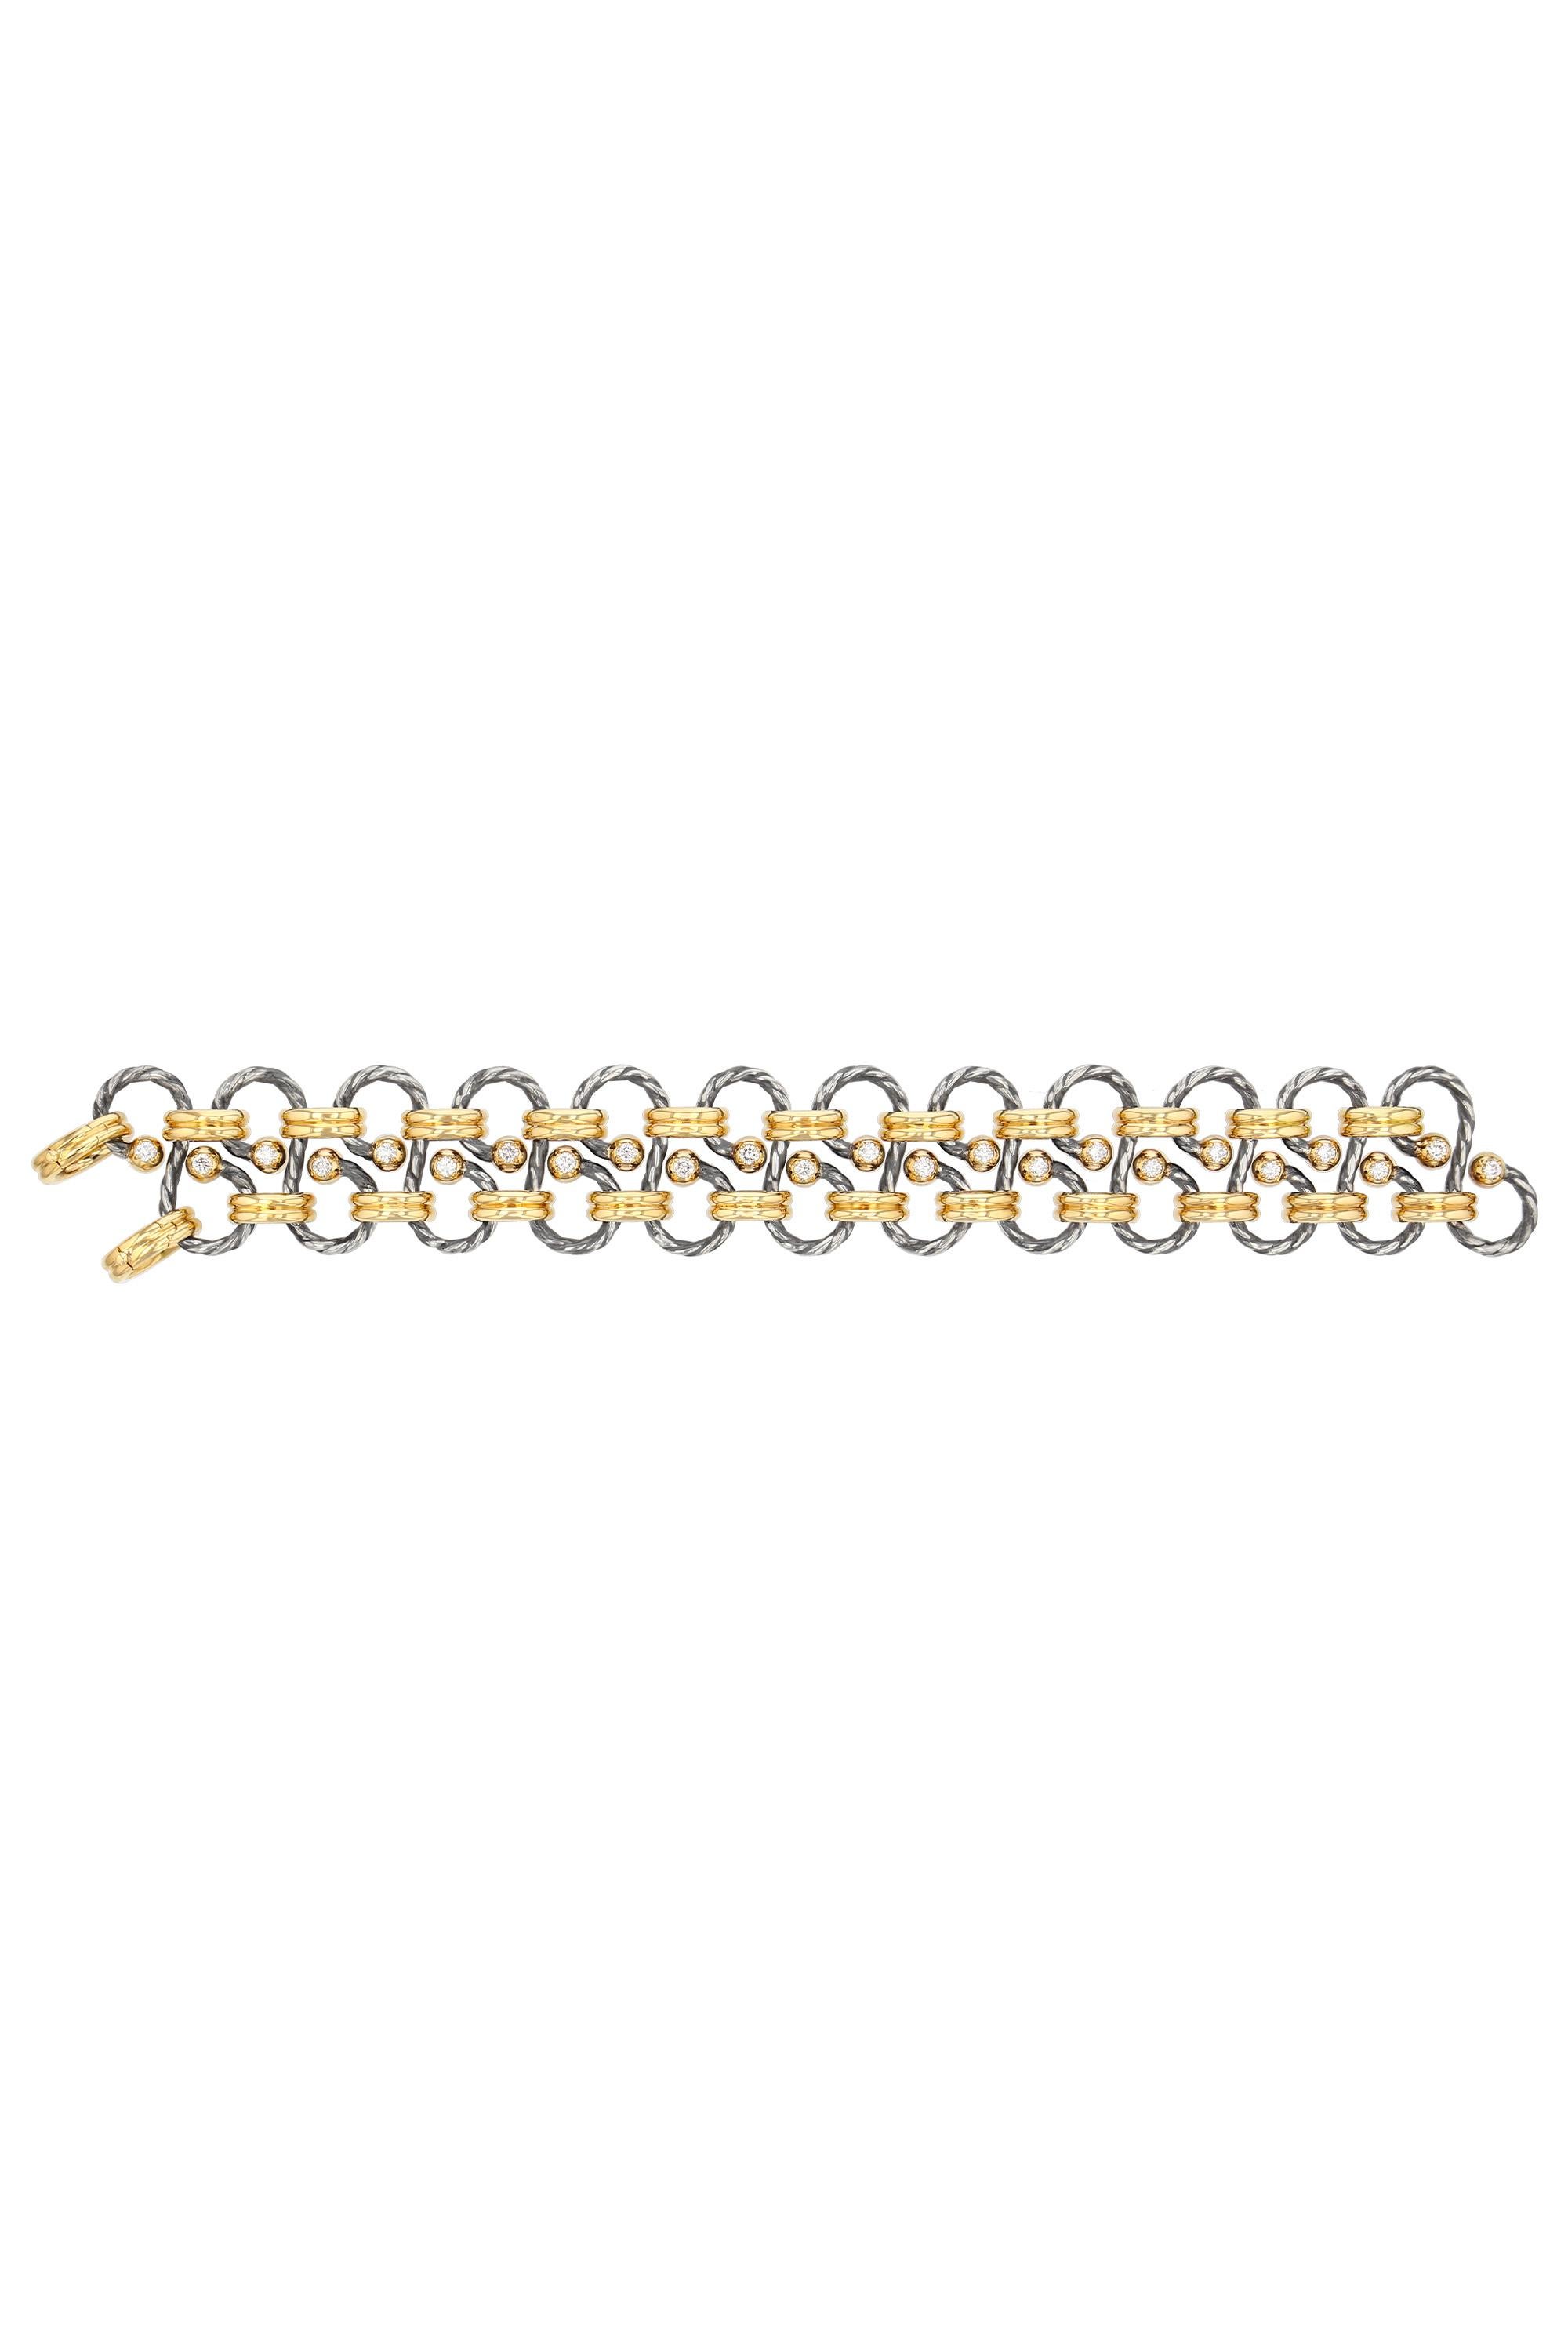 Bracelet alternating gadrooned rings of yellow gold and twisted serpentine rings of distressed silver punctuated with gold balls set with a diamond.

Details:
26 GVS Diamonds: 1.04 cts
18k Yellow Gold : 45 g
925 Distressed Silver: 18 g
Made in France